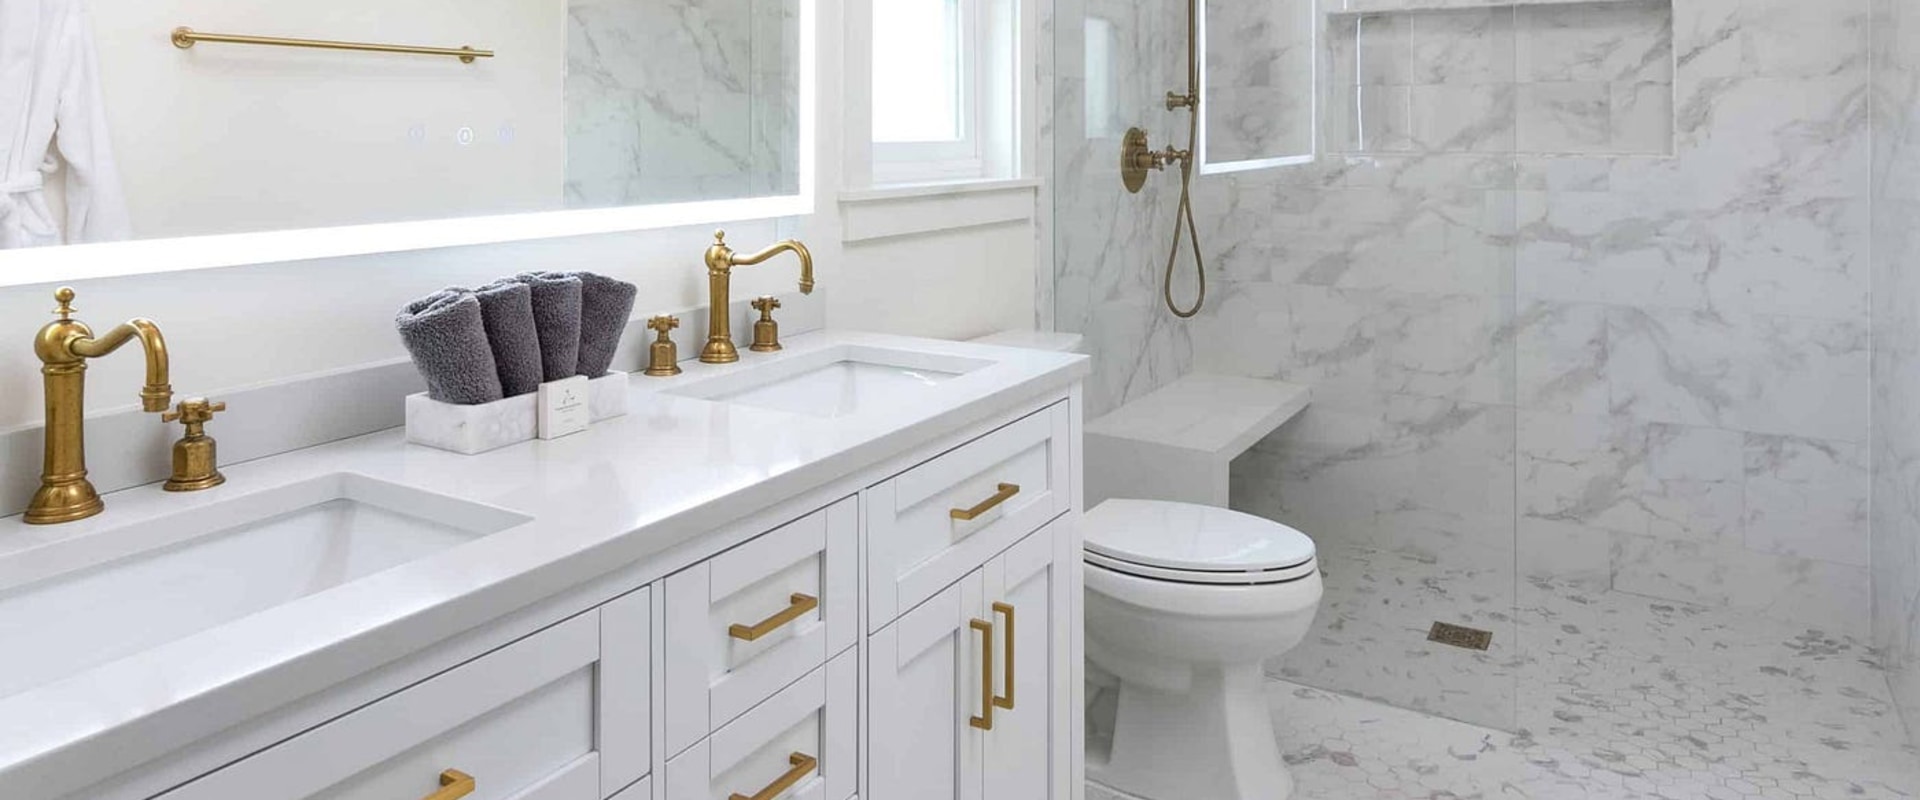 The Ultimate Guide to Creating a Realistic Budget for Your Bathroom Remodel